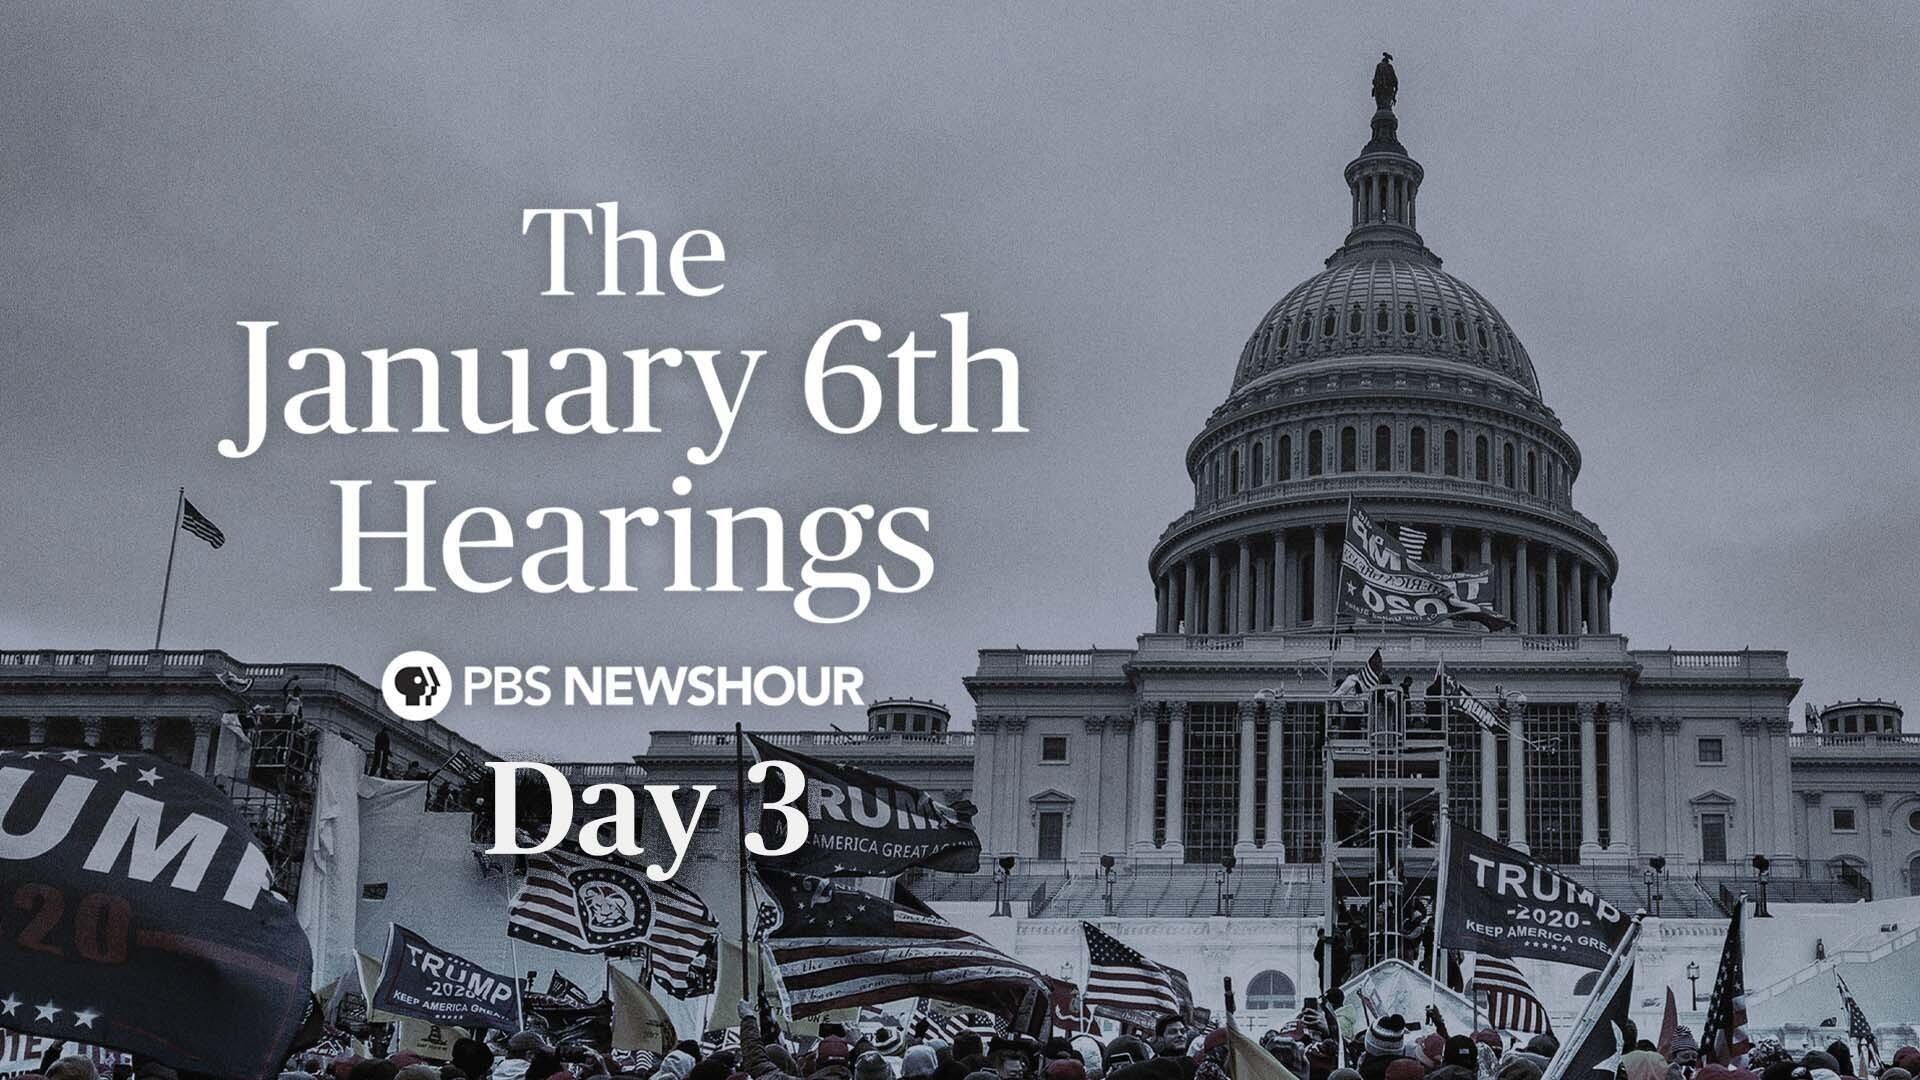 The January 6th Hearings - Day 3